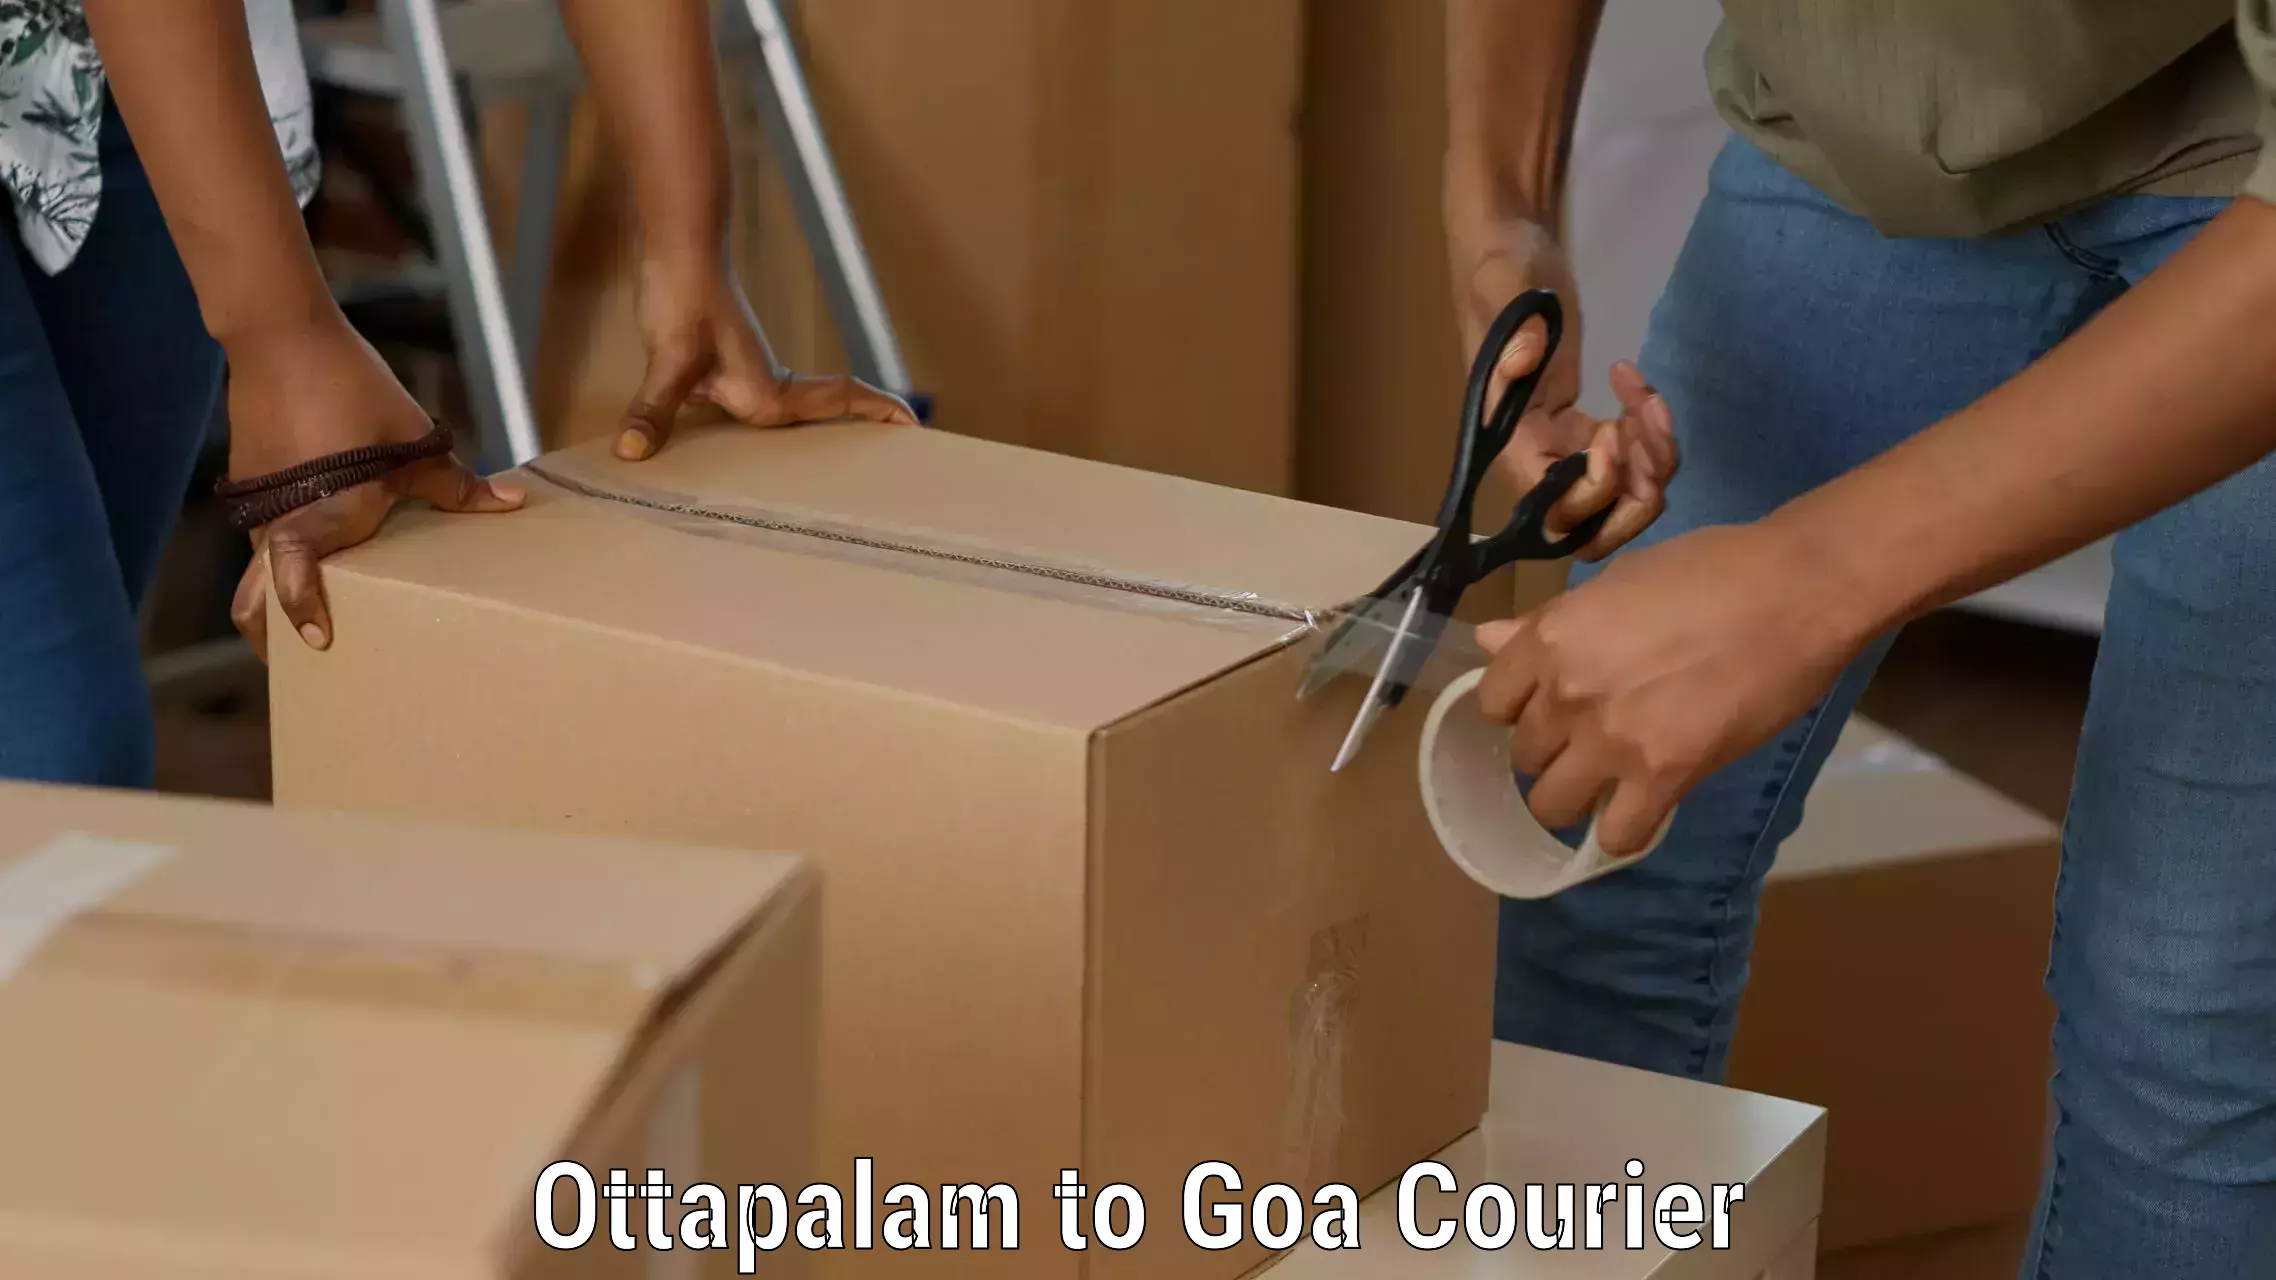 Courier service comparison in Ottapalam to Margao